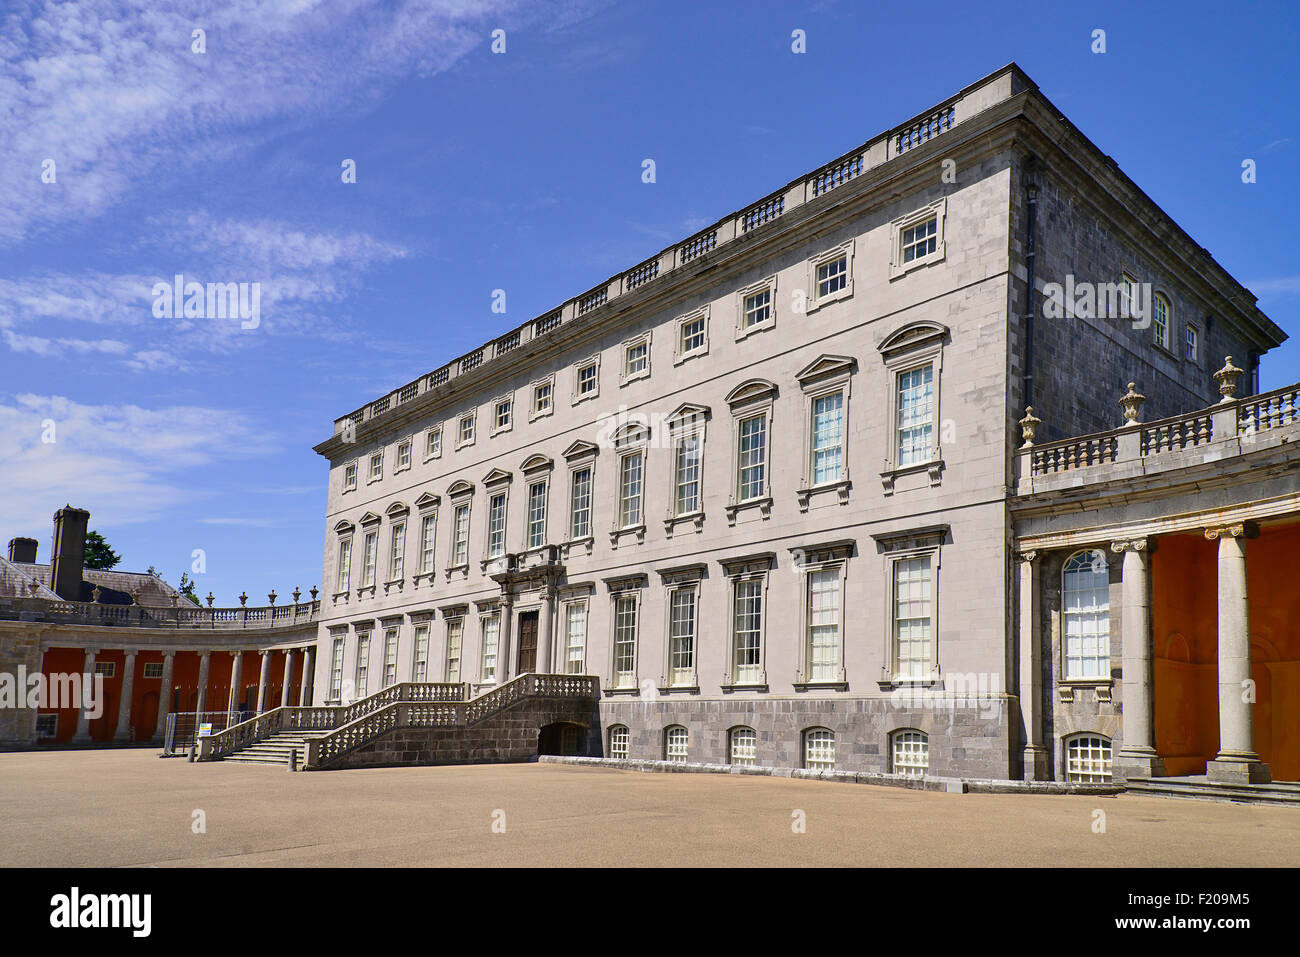 Ireland County Kildare Celbridge Castletown House Palladian country house built in 1722 for William Conolly the Speaker of the Stock Photo